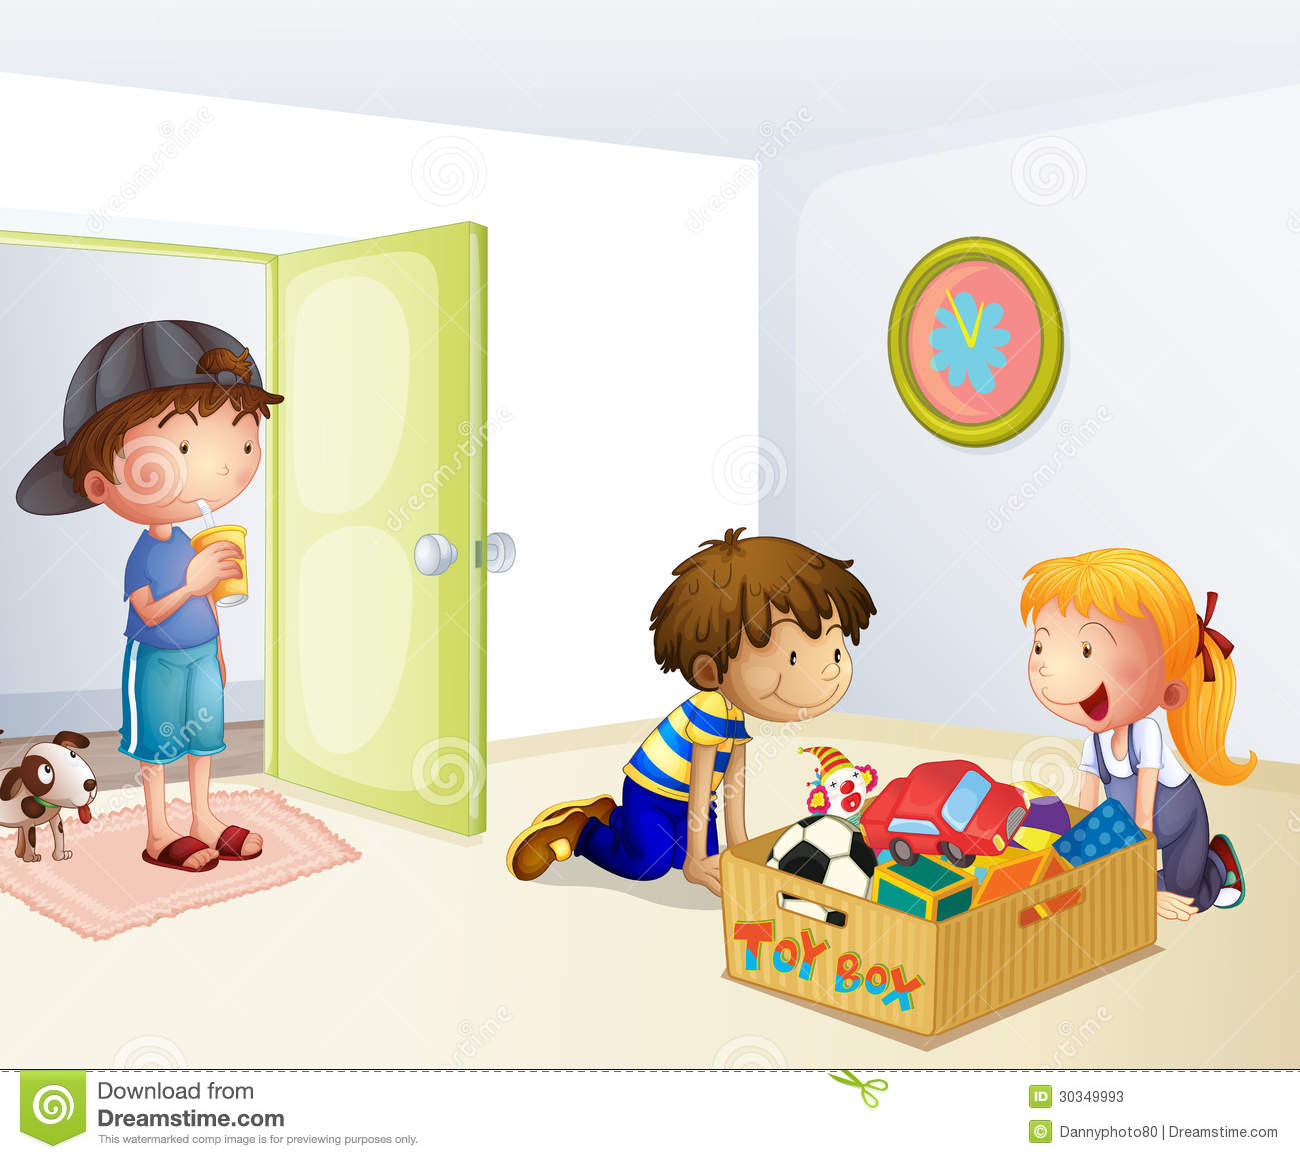 4492 Toys free clipart.